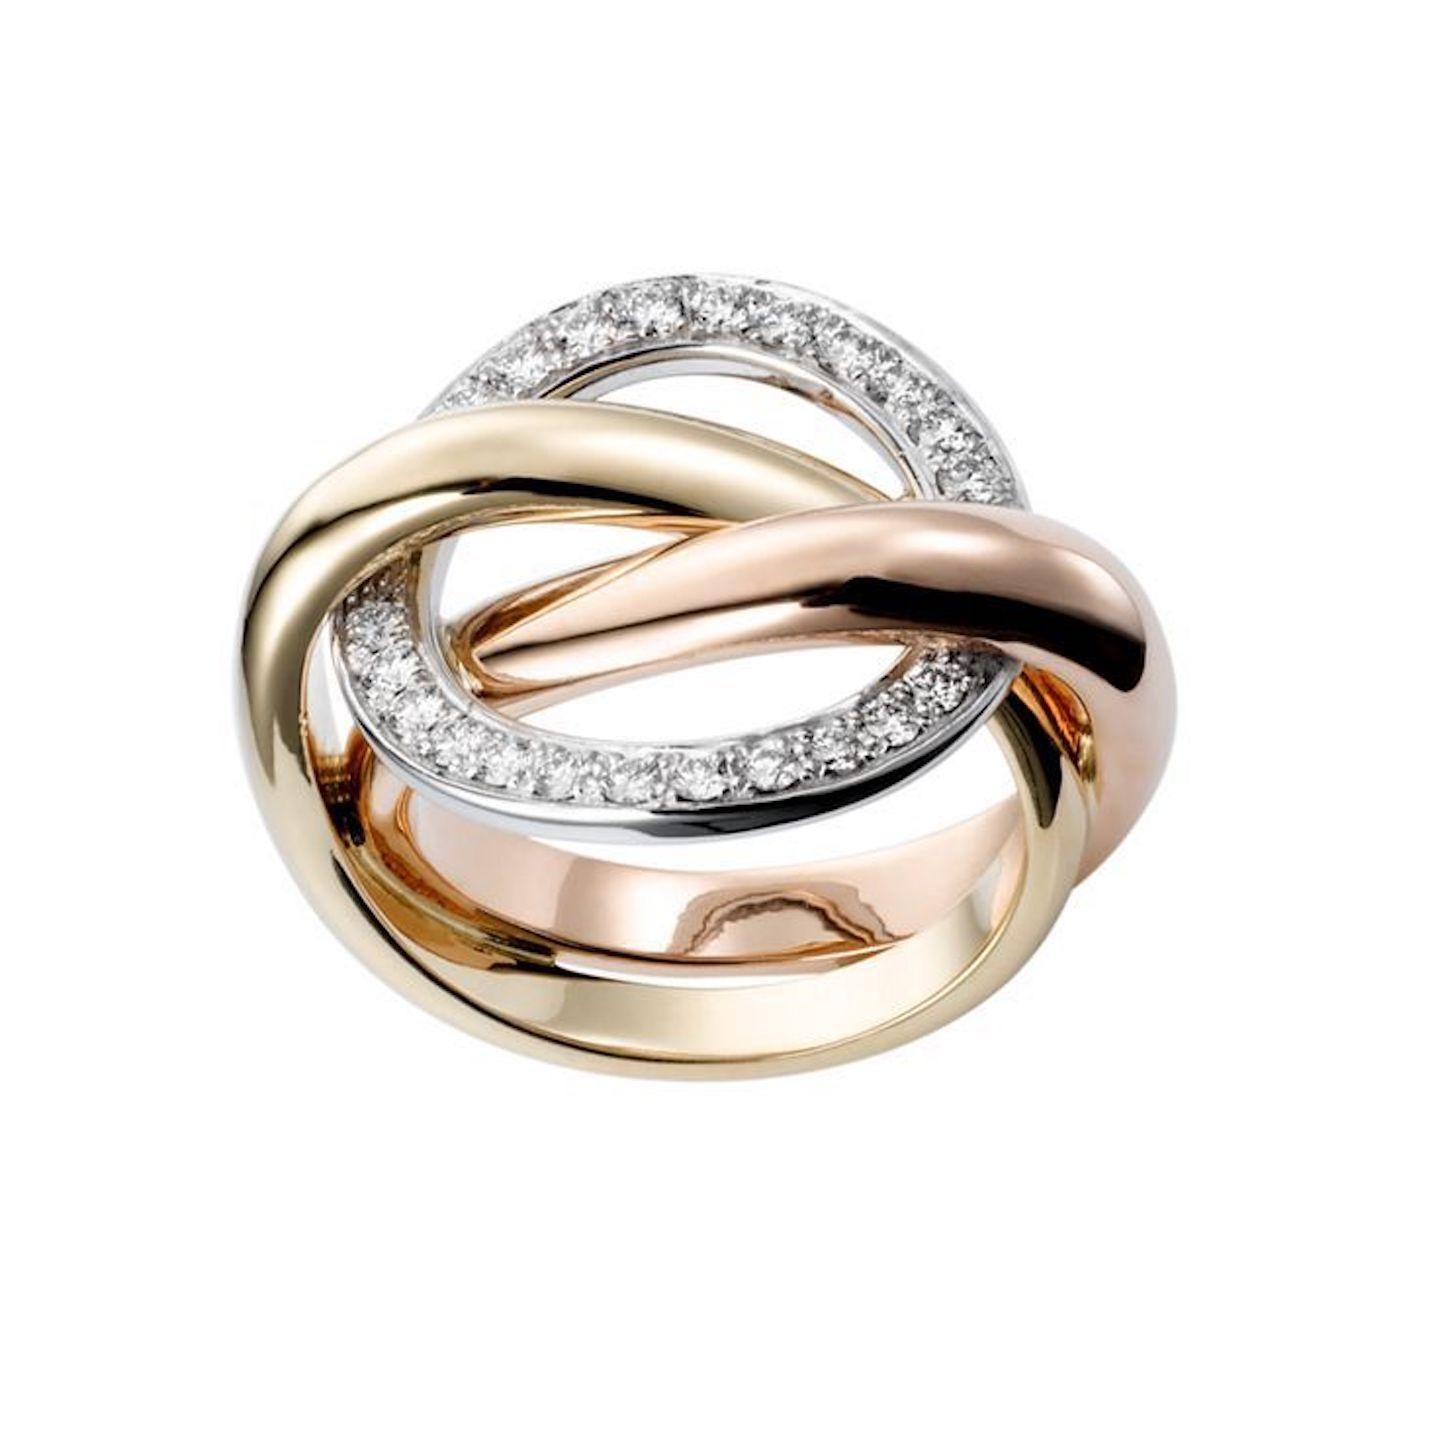 Beautiful ring crafted by famed jewelry house Cartier. This design is known as the Cartier Trinity 'Crash' ring and is comprised of interlocking tri-color 18 karat gold bands. The fixed white gold band is set with round brilliant cut diamonds